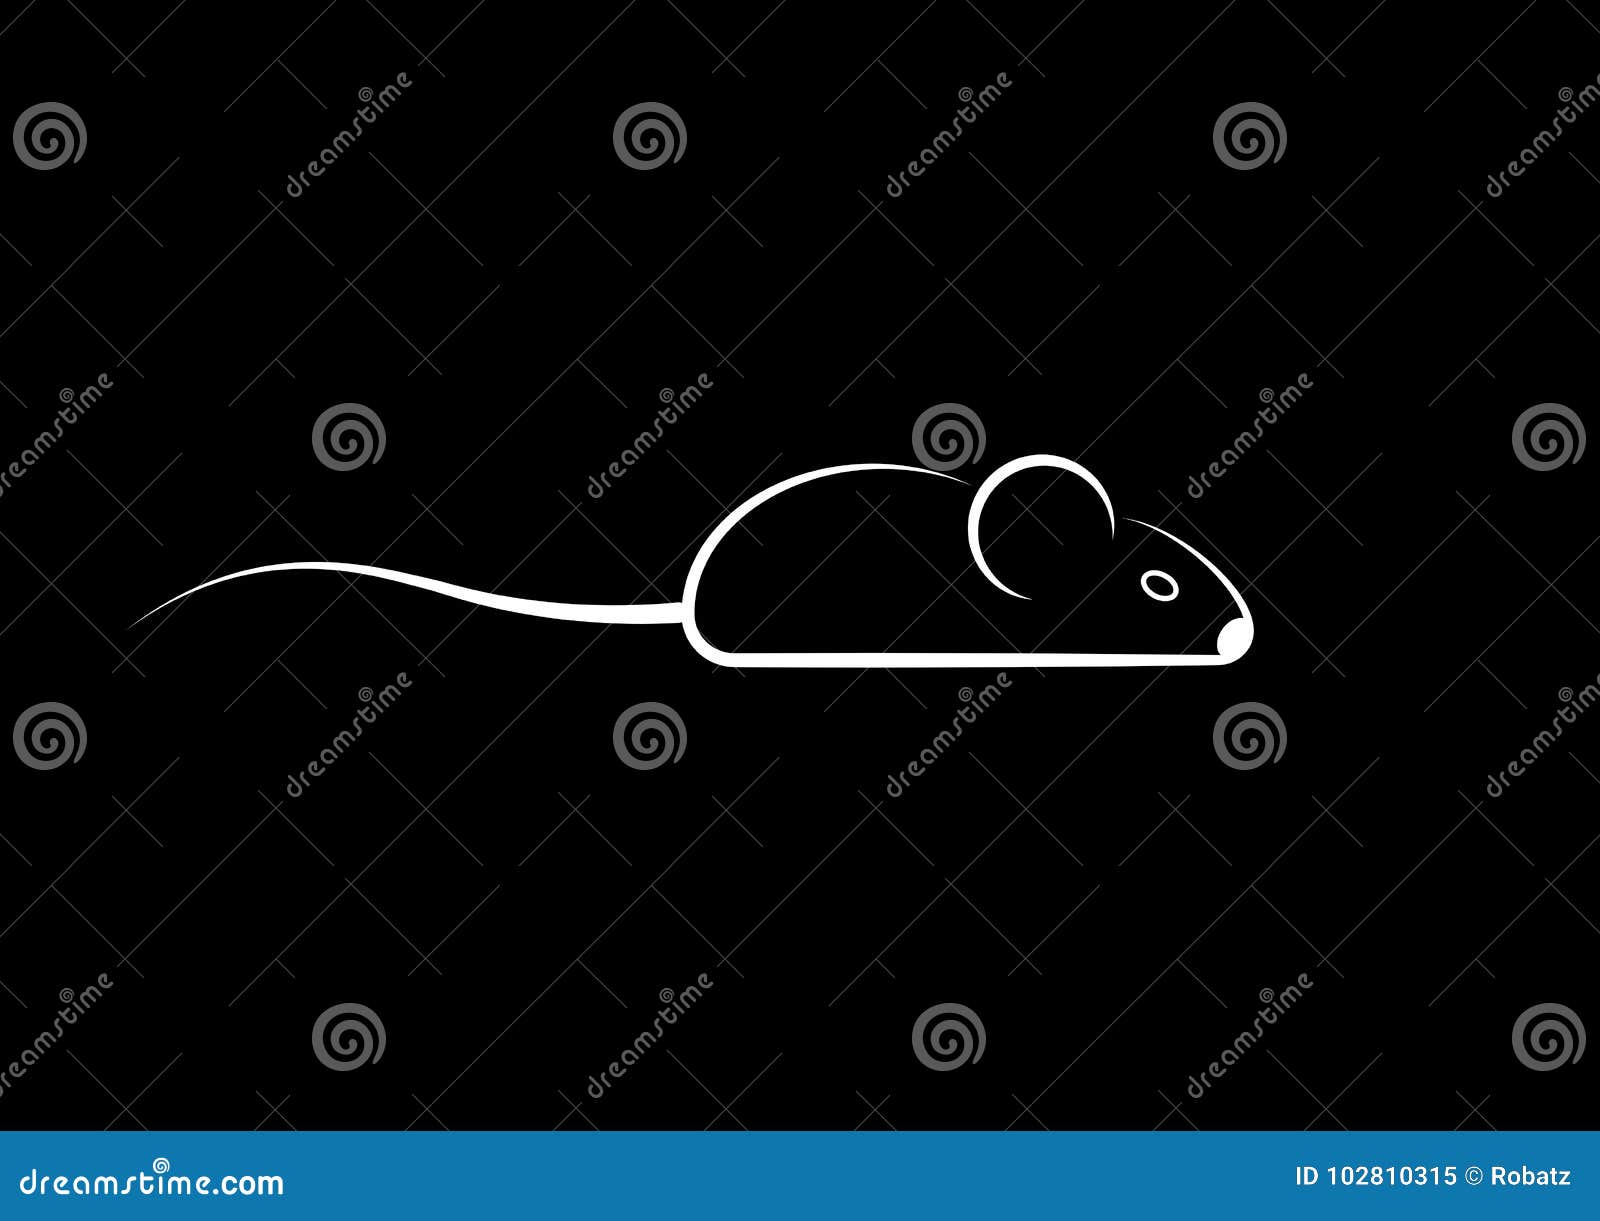 stylish icon of a white mouse icone for web and print. minimalistic  of the home of a rodent mouse or rat